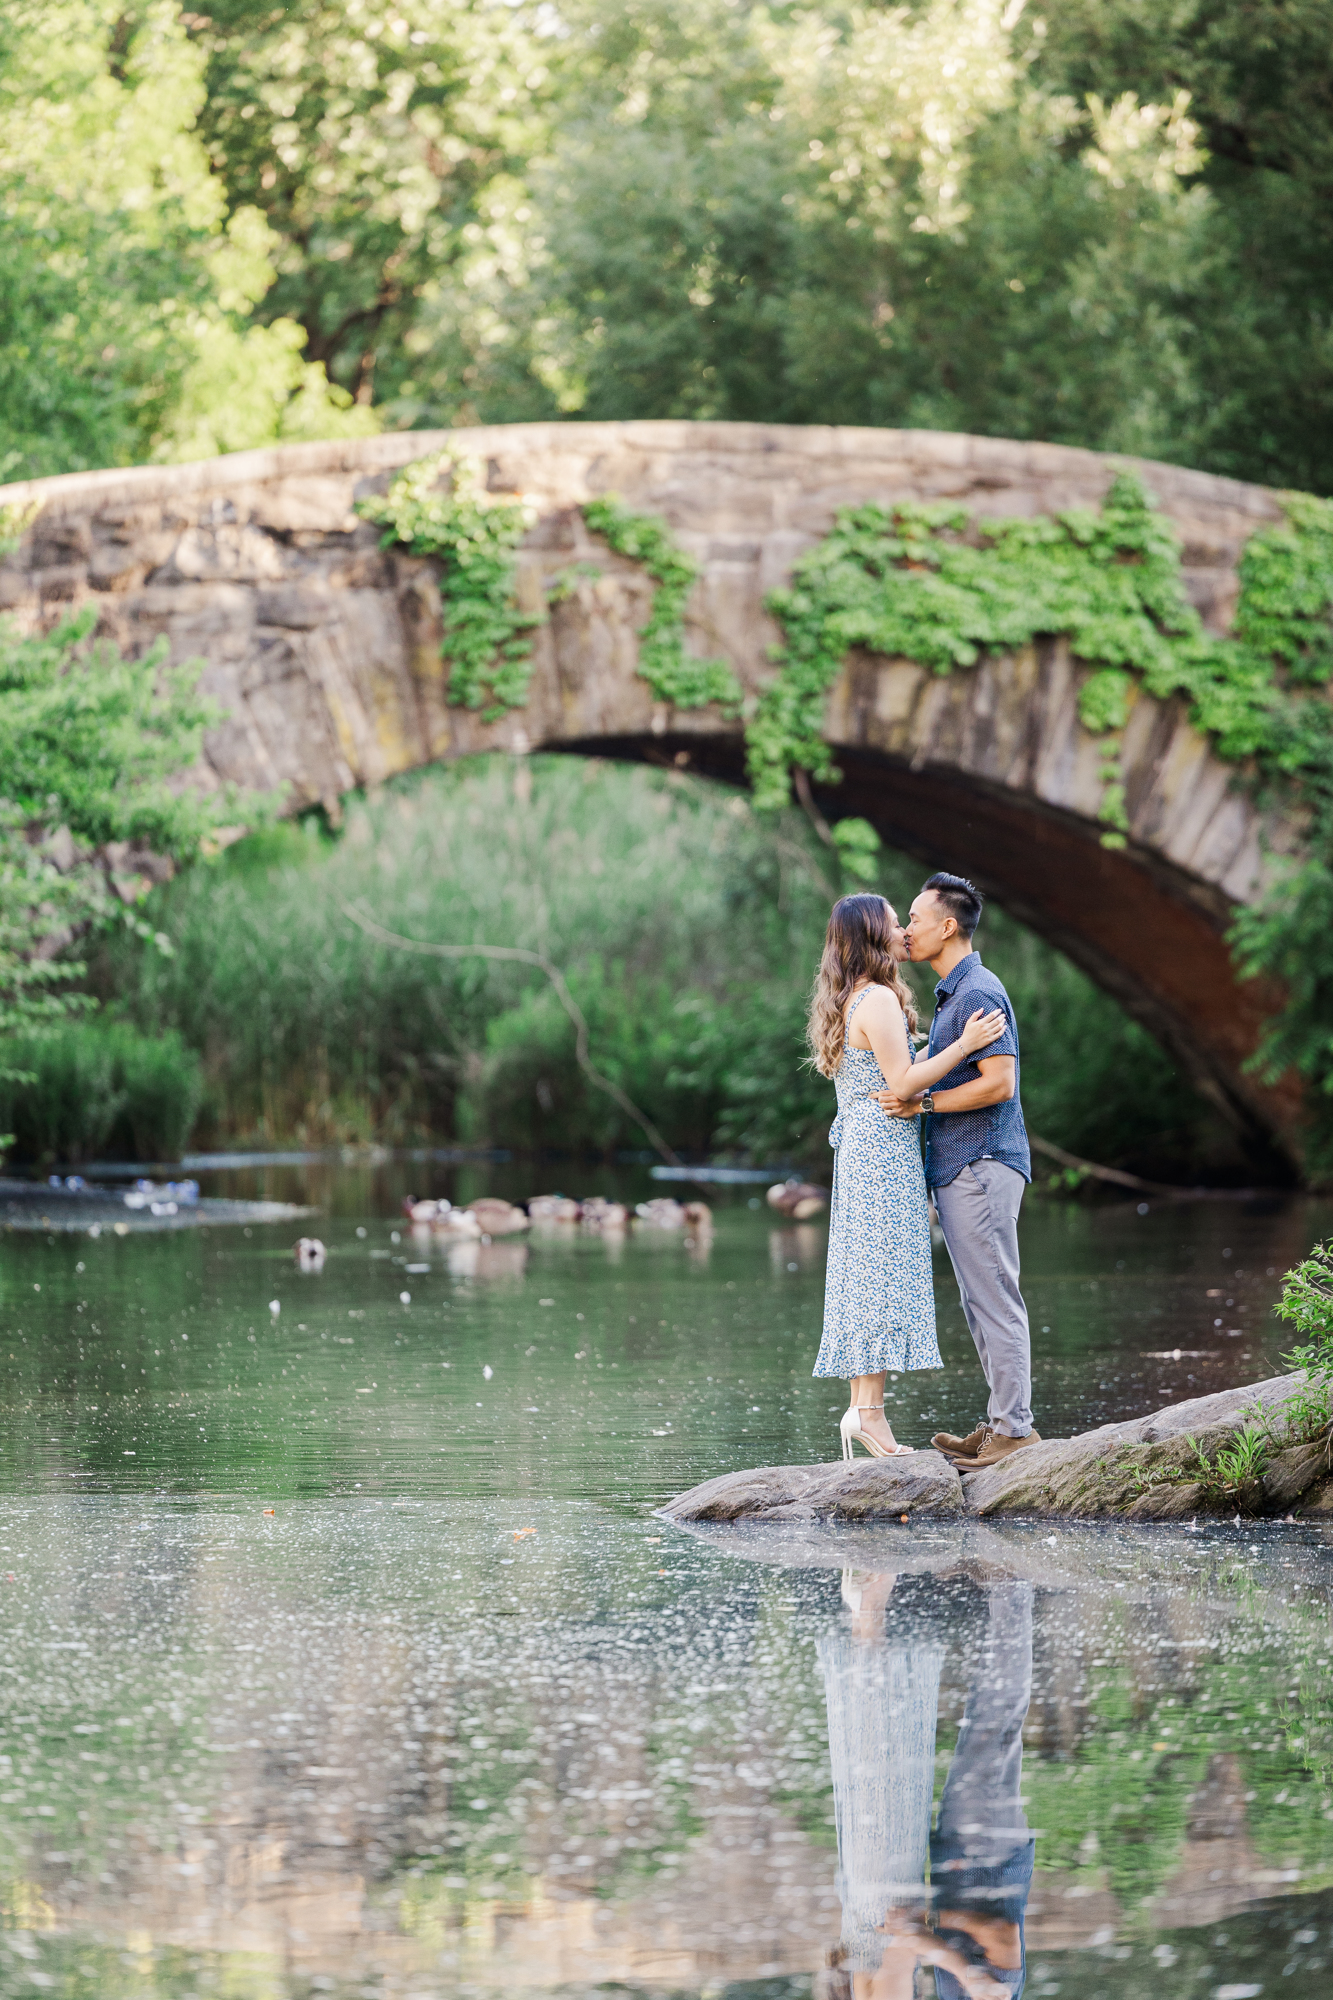 Flawless Engagement Photos in Central Park, New York